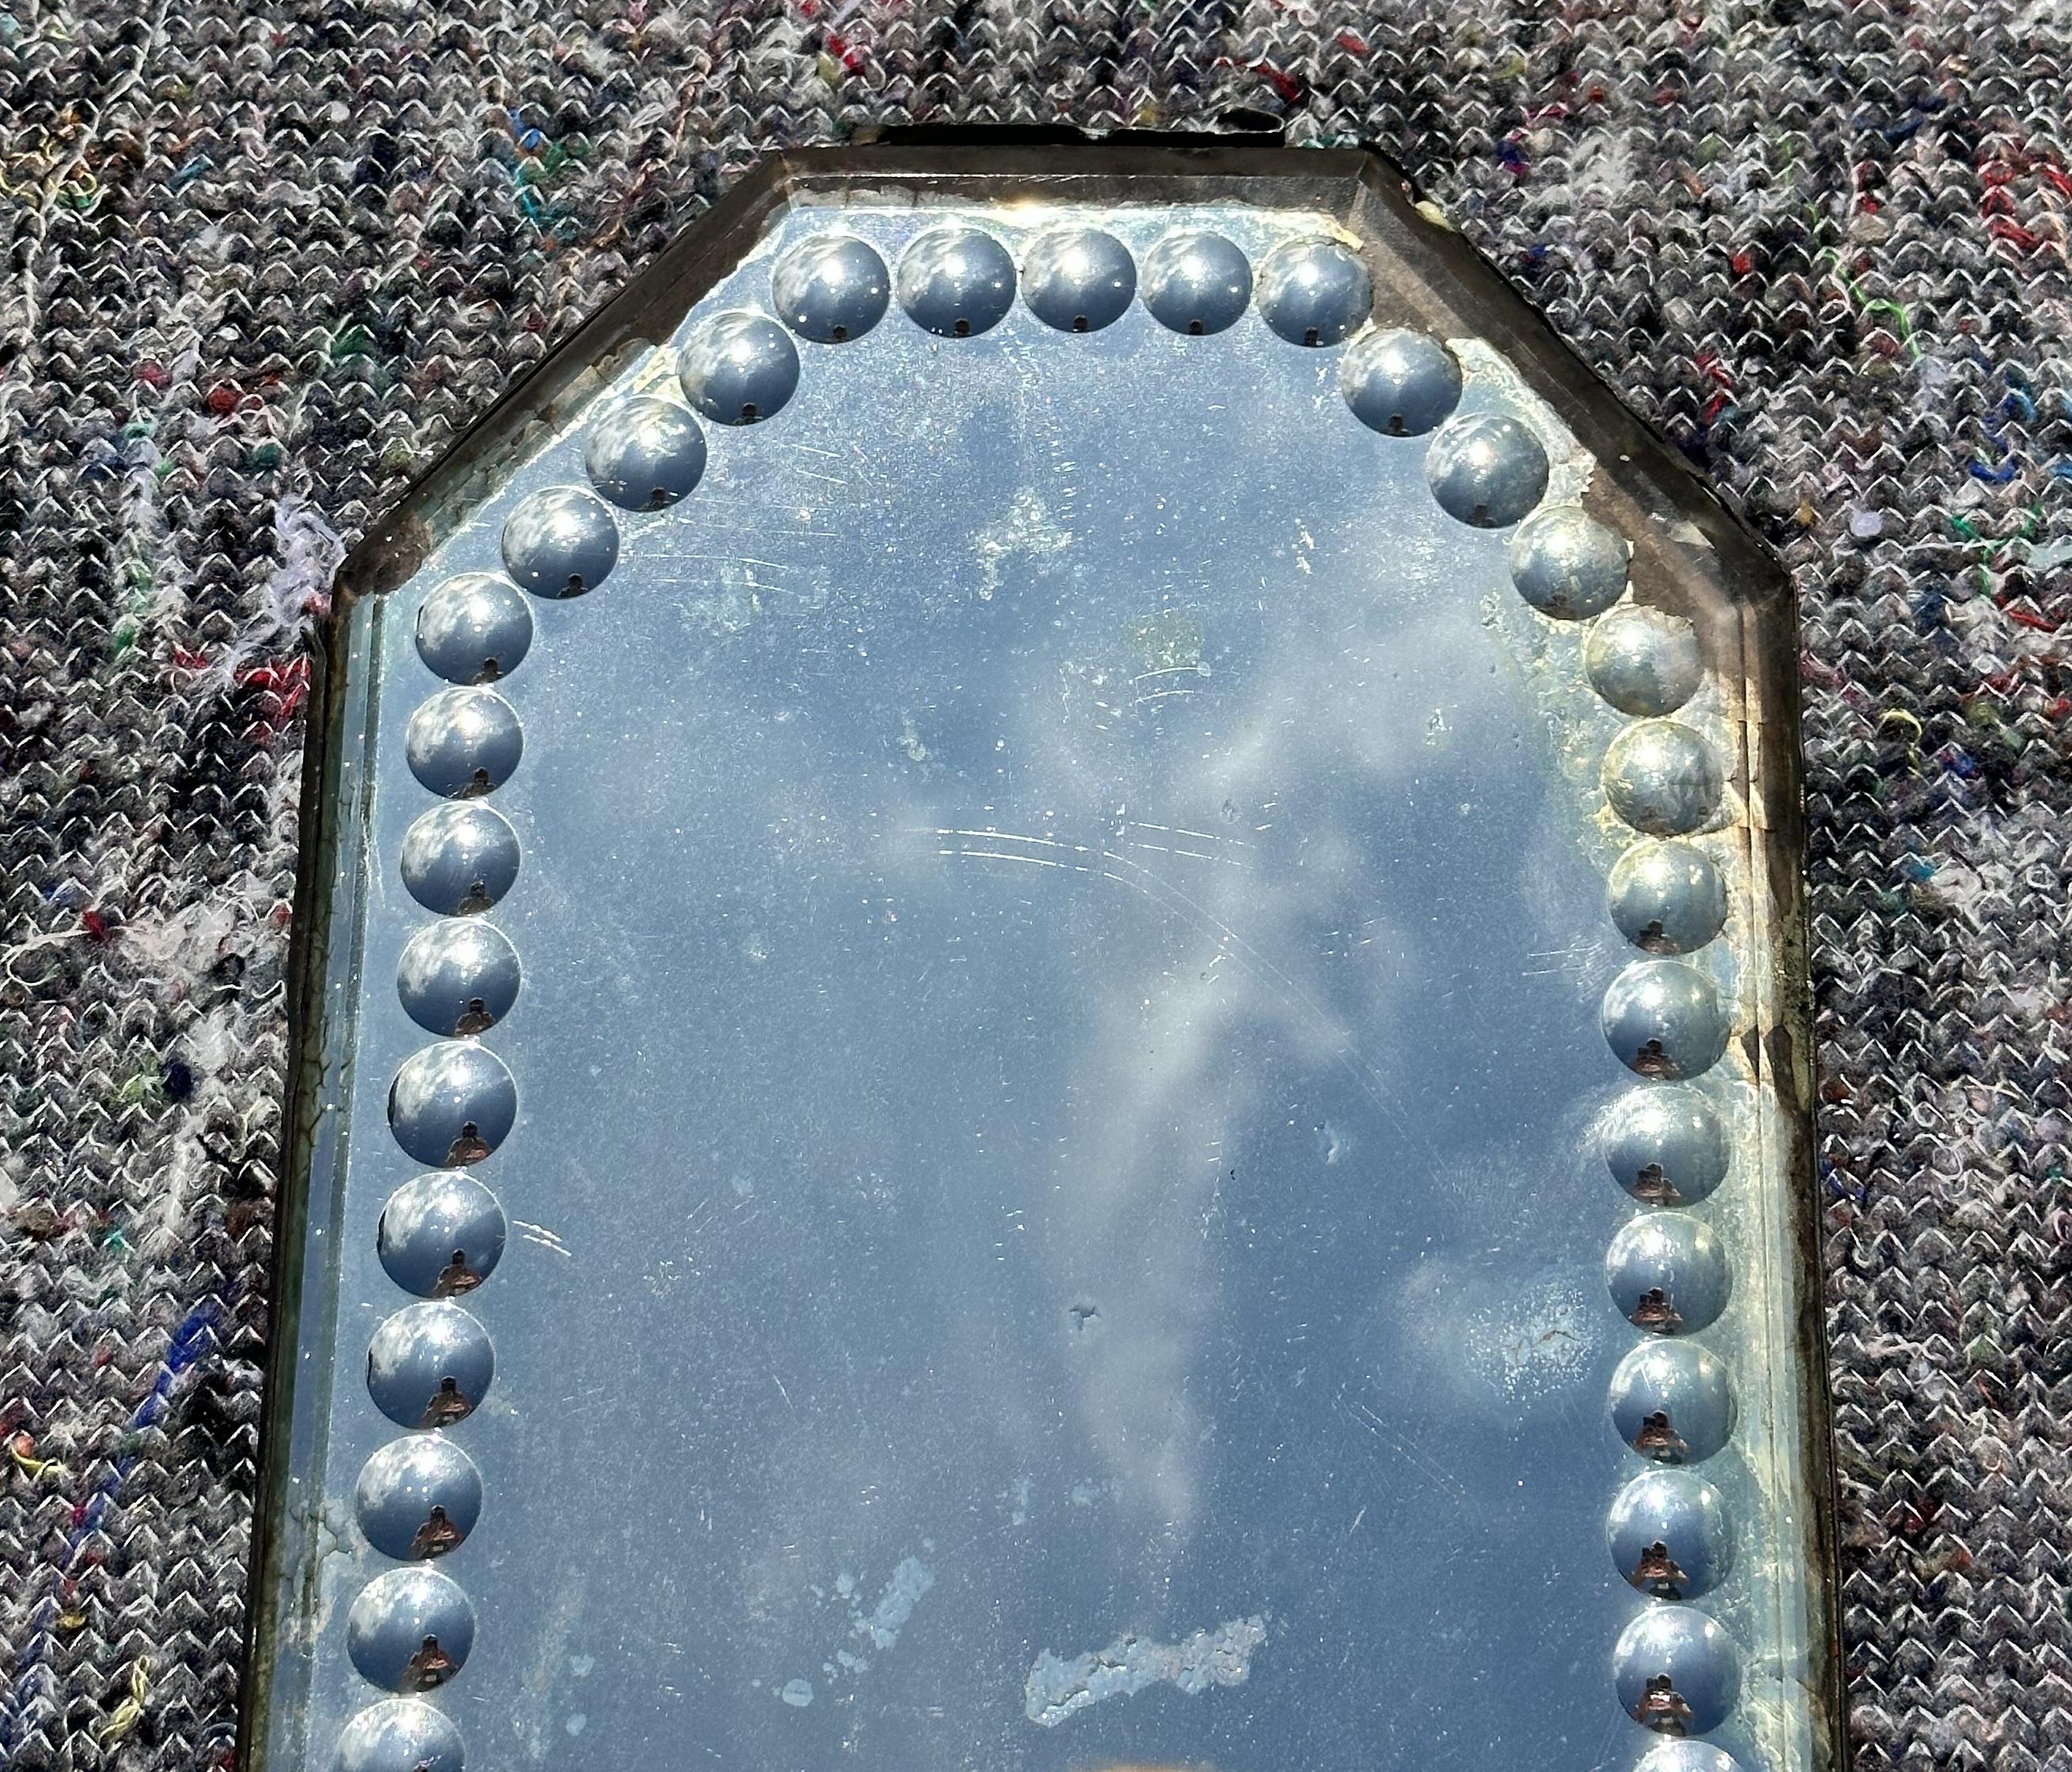 We are delighted to offer for sale this lovely, very collectable, antique circa 1880 Sorcerer's mirror.

I have two of these for sale, an oval and a rectangle with tapered corners, this sale is for the mirror mentioned above only with the other